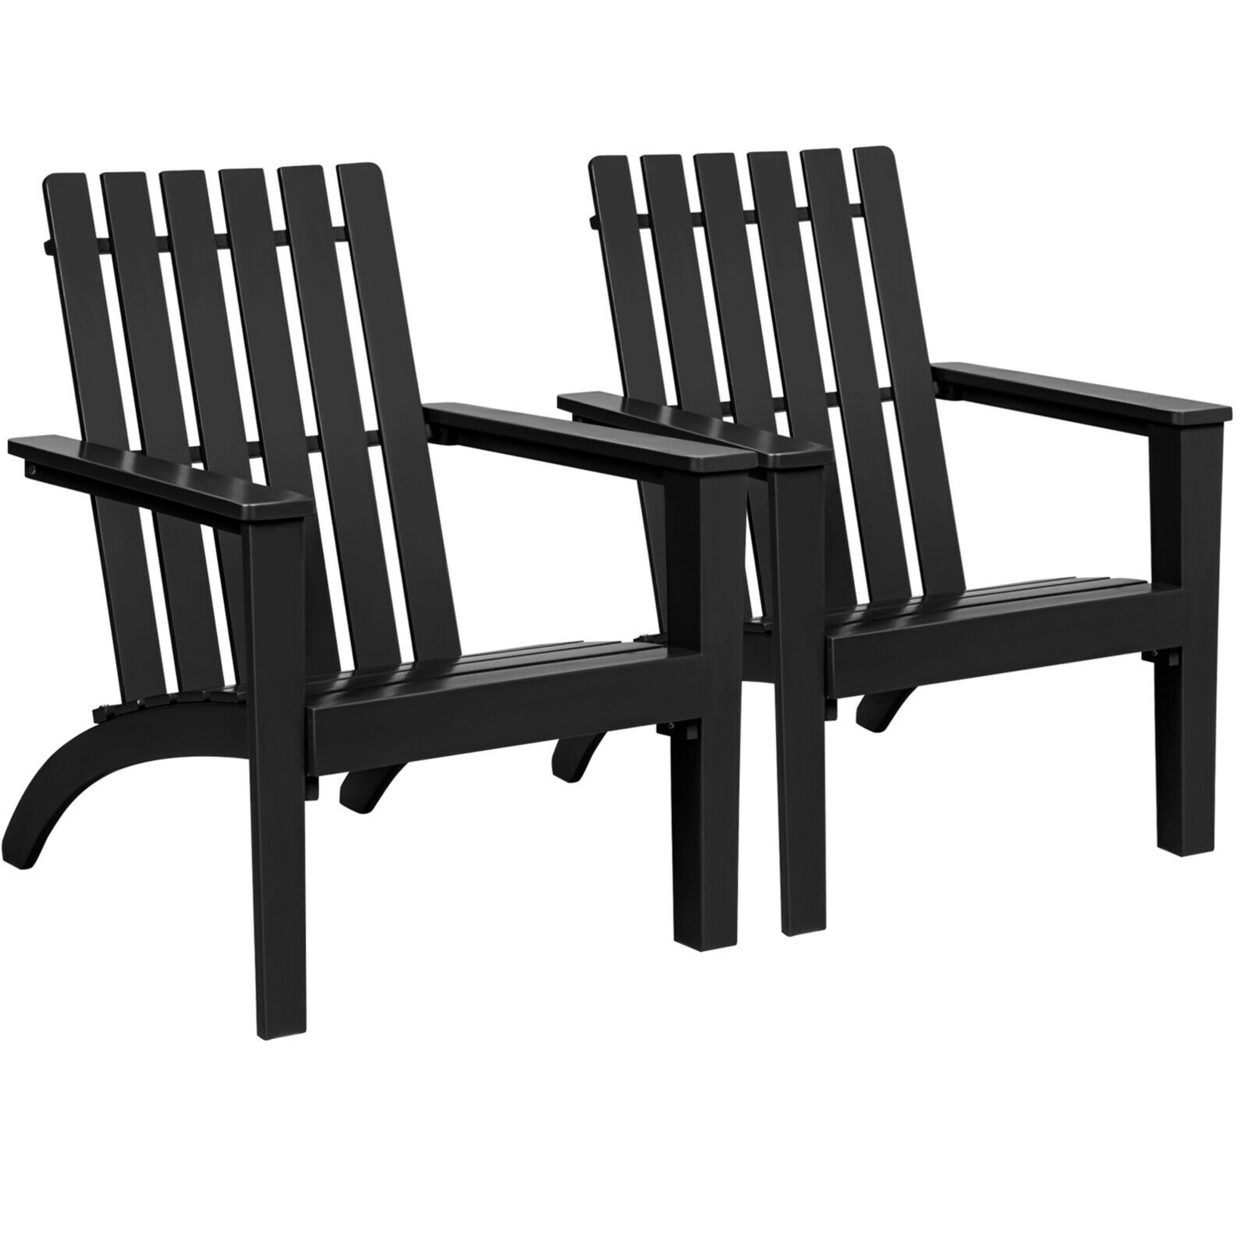 Set Of 2 Outdoor Wooden Adirondack Chair Patio Lounge Chair W/ Armrest - Black